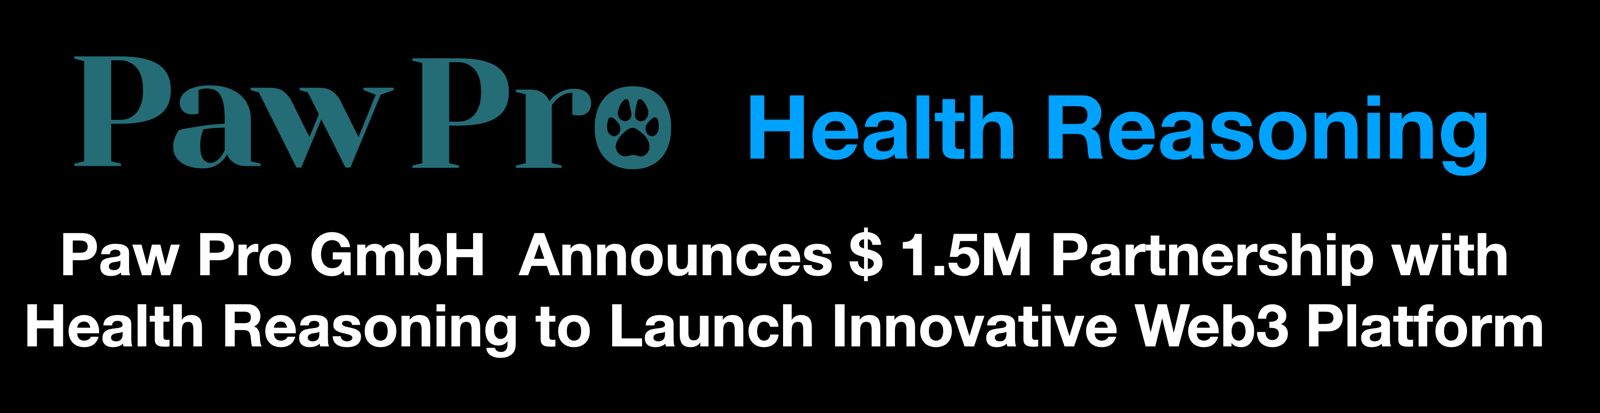 Paw Pro GmbH Announces $1.5M Partnership with Health Reasoning to Launch Innovative Web3 Platform